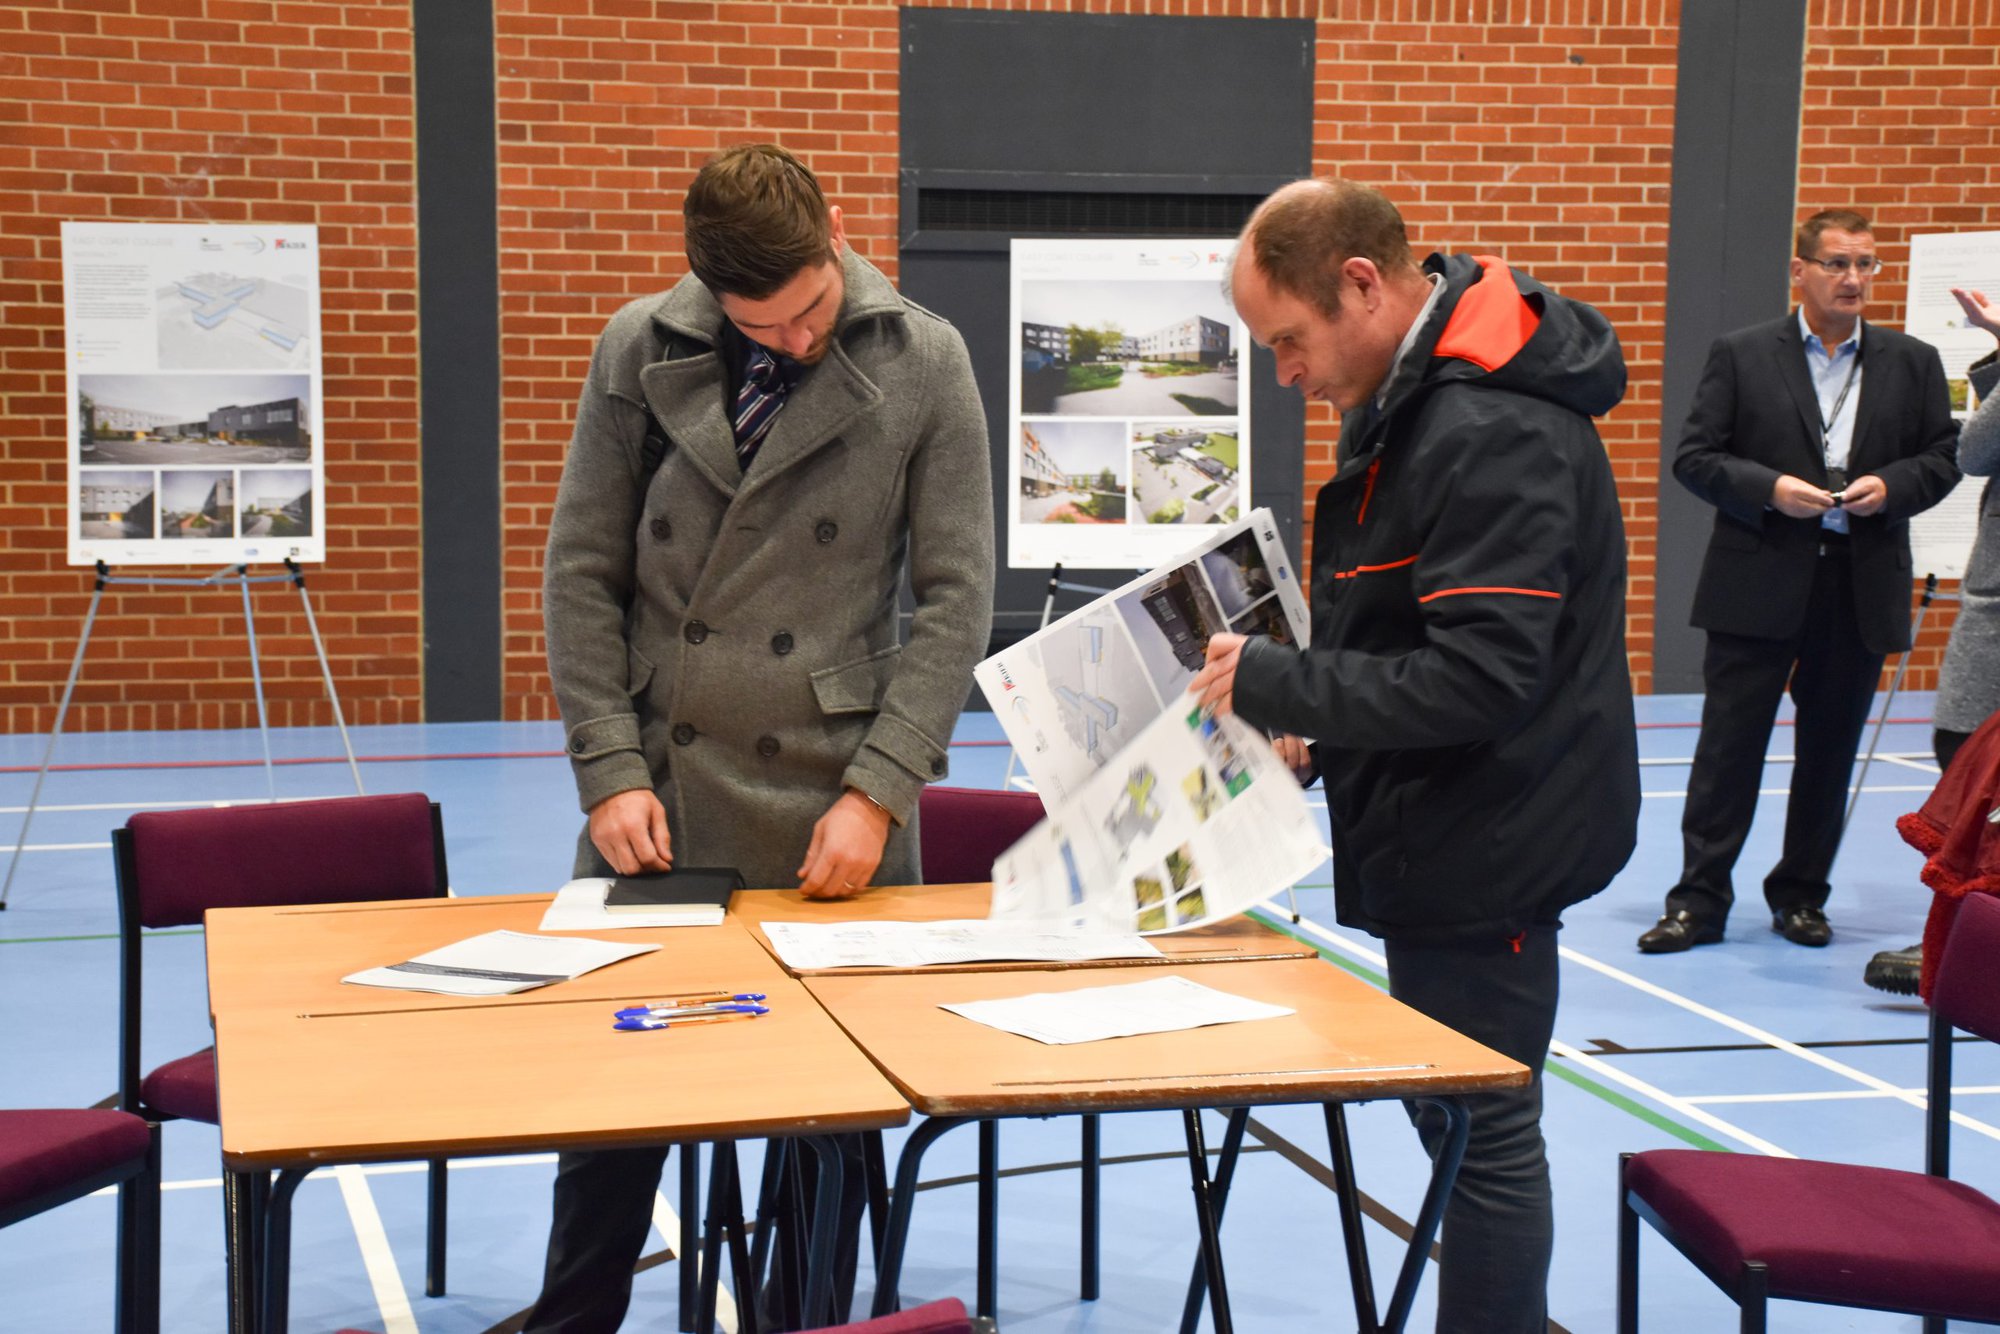 The public consultation on plans to redevelop East Coast College's Great Yarmouth campus.